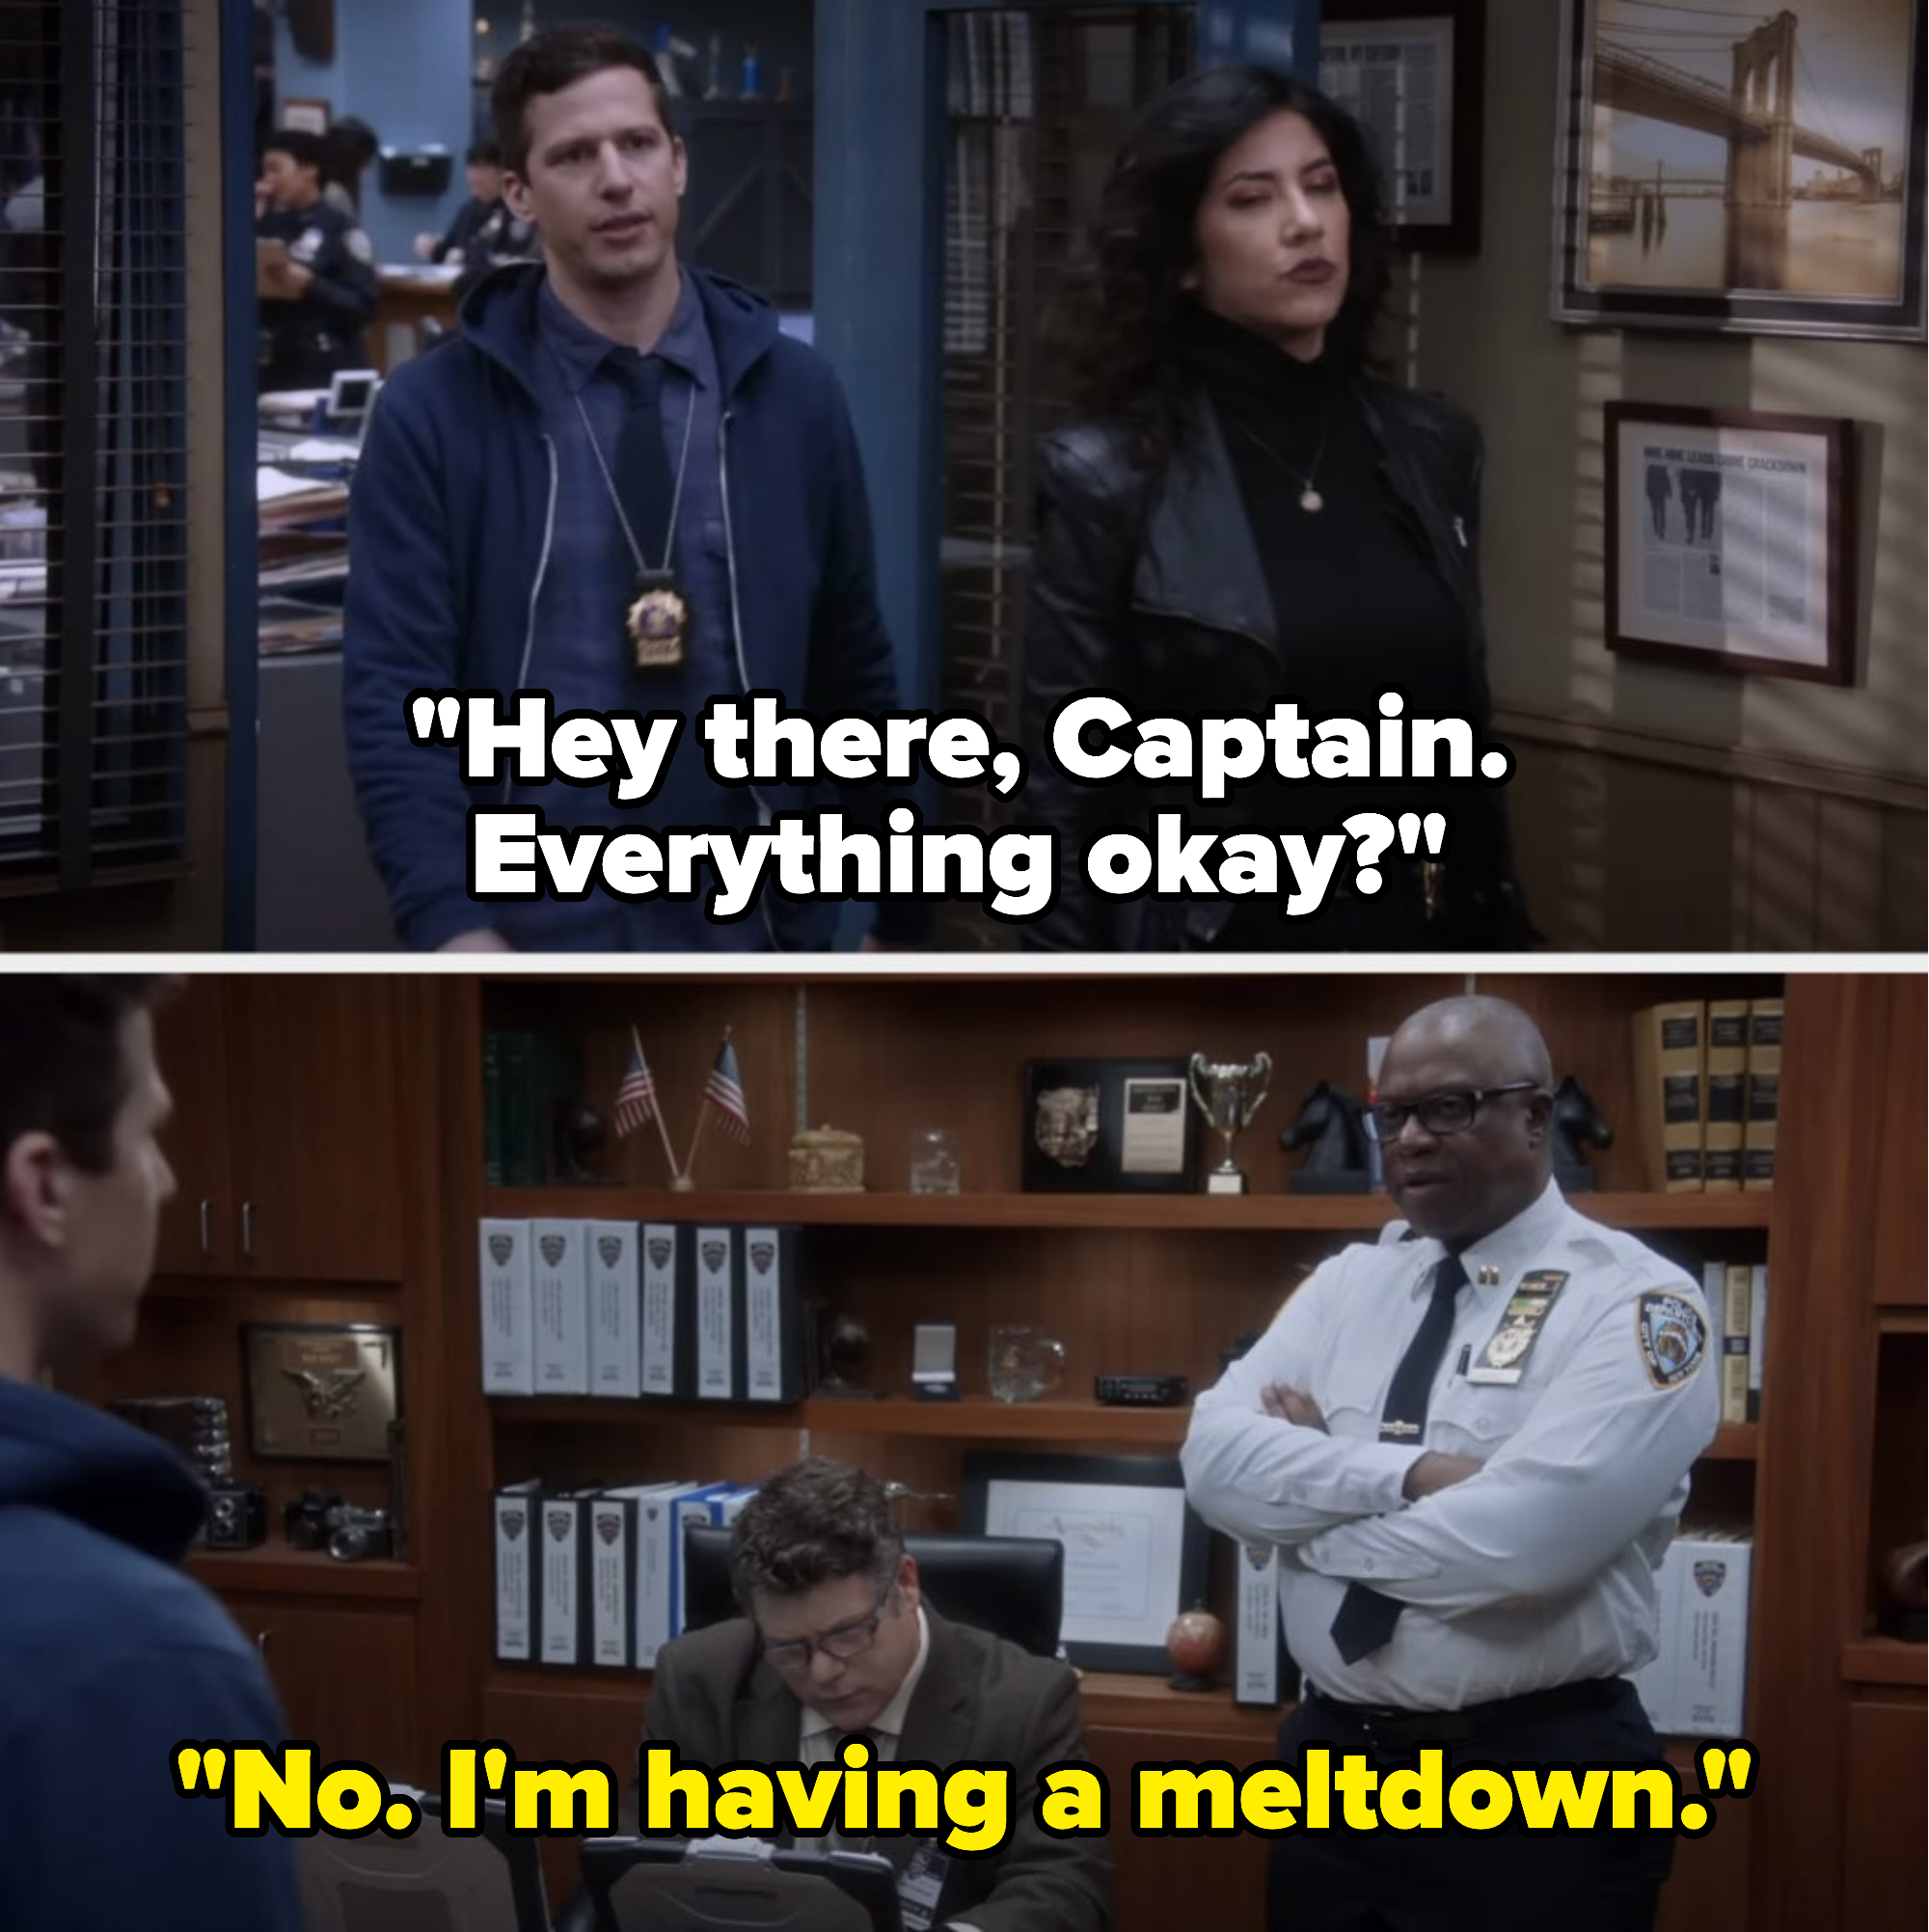 Holt has a meltdown in the calmest manner